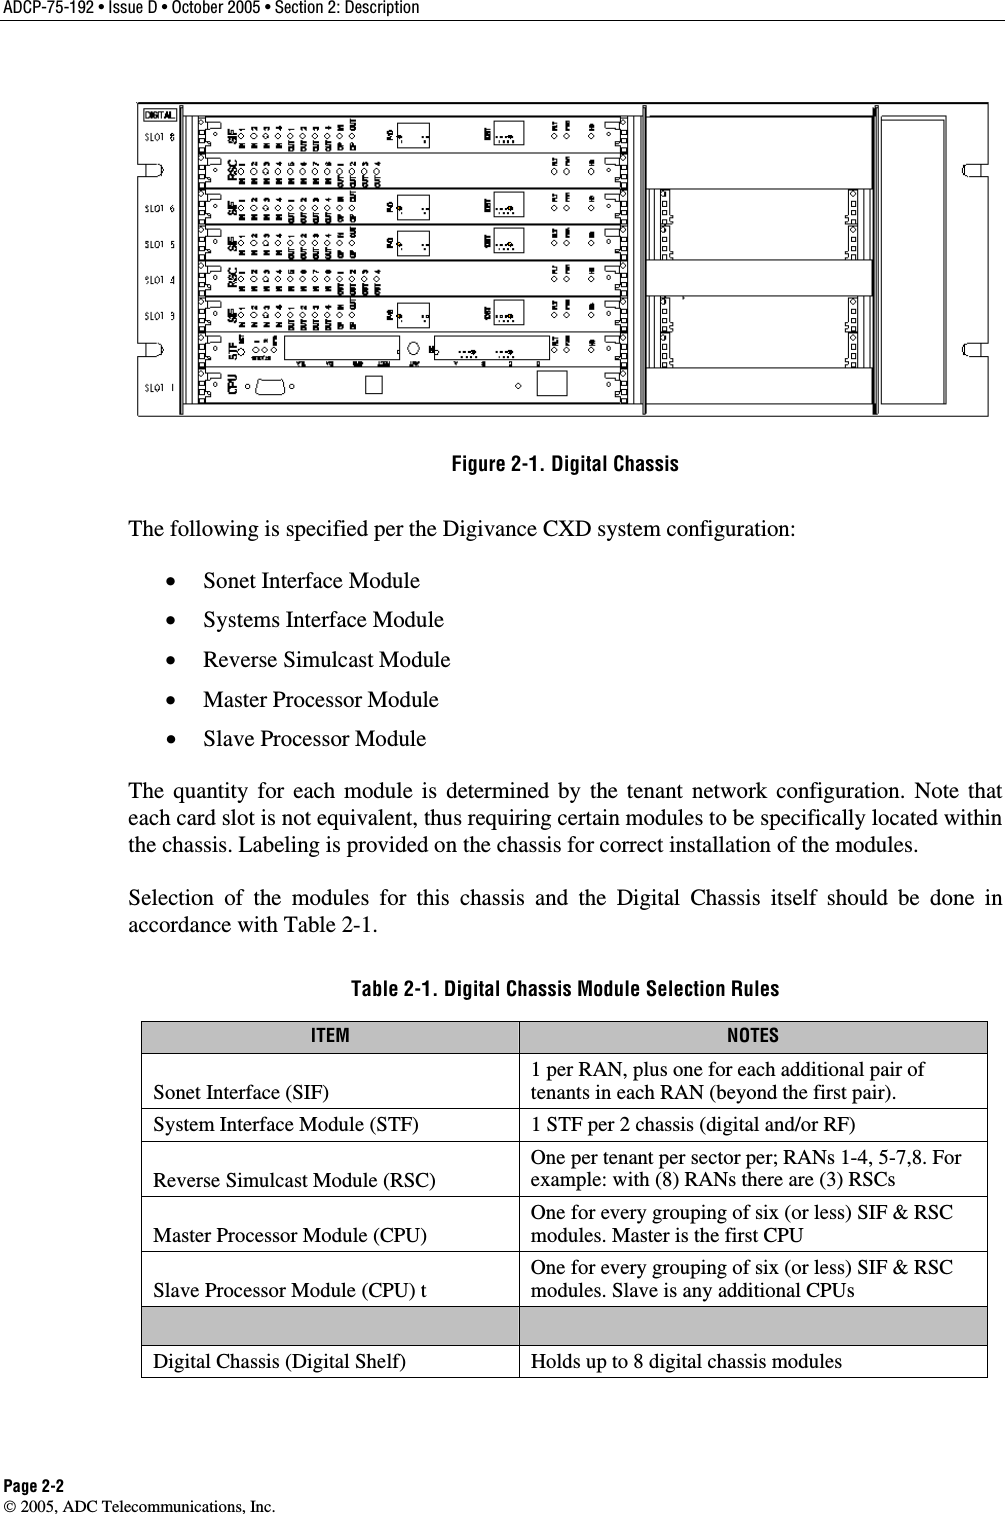 ADCP-75-192 • Issue D • October 2005 • Section 2: Description Page 2-2  2005, ADC Telecommunications, Inc.  Figure 2-1. Digital Chassis The following is specified per the Digivance CXD system configuration: •  Sonet Interface Module •  Systems Interface Module •  Reverse Simulcast Module •  Master Processor Module •  Slave Processor Module The quantity for each module is determined by the tenant network configuration. Note that each card slot is not equivalent, thus requiring certain modules to be specifically located within the chassis. Labeling is provided on the chassis for correct installation of the modules. Selection of the modules for this chassis and the Digital Chassis itself should be done in accordance with Table 2-1. Table 2-1. Digital Chassis Module Selection Rules ITEM  NOTES Sonet Interface (SIF) 1 per RAN, plus one for each additional pair of tenants in each RAN (beyond the first pair). System Interface Module (STF)   1 STF per 2 chassis (digital and/or RF) Reverse Simulcast Module (RSC)  One per tenant per sector per; RANs 1-4, 5-7,8. For example: with (8) RANs there are (3) RSCs Master Processor Module (CPU)  One for every grouping of six (or less) SIF &amp; RSC modules. Master is the first CPU Slave Processor Module (CPU) t One for every grouping of six (or less) SIF &amp; RSC modules. Slave is any additional CPUs     Digital Chassis (Digital Shelf)  Holds up to 8 digital chassis modules  